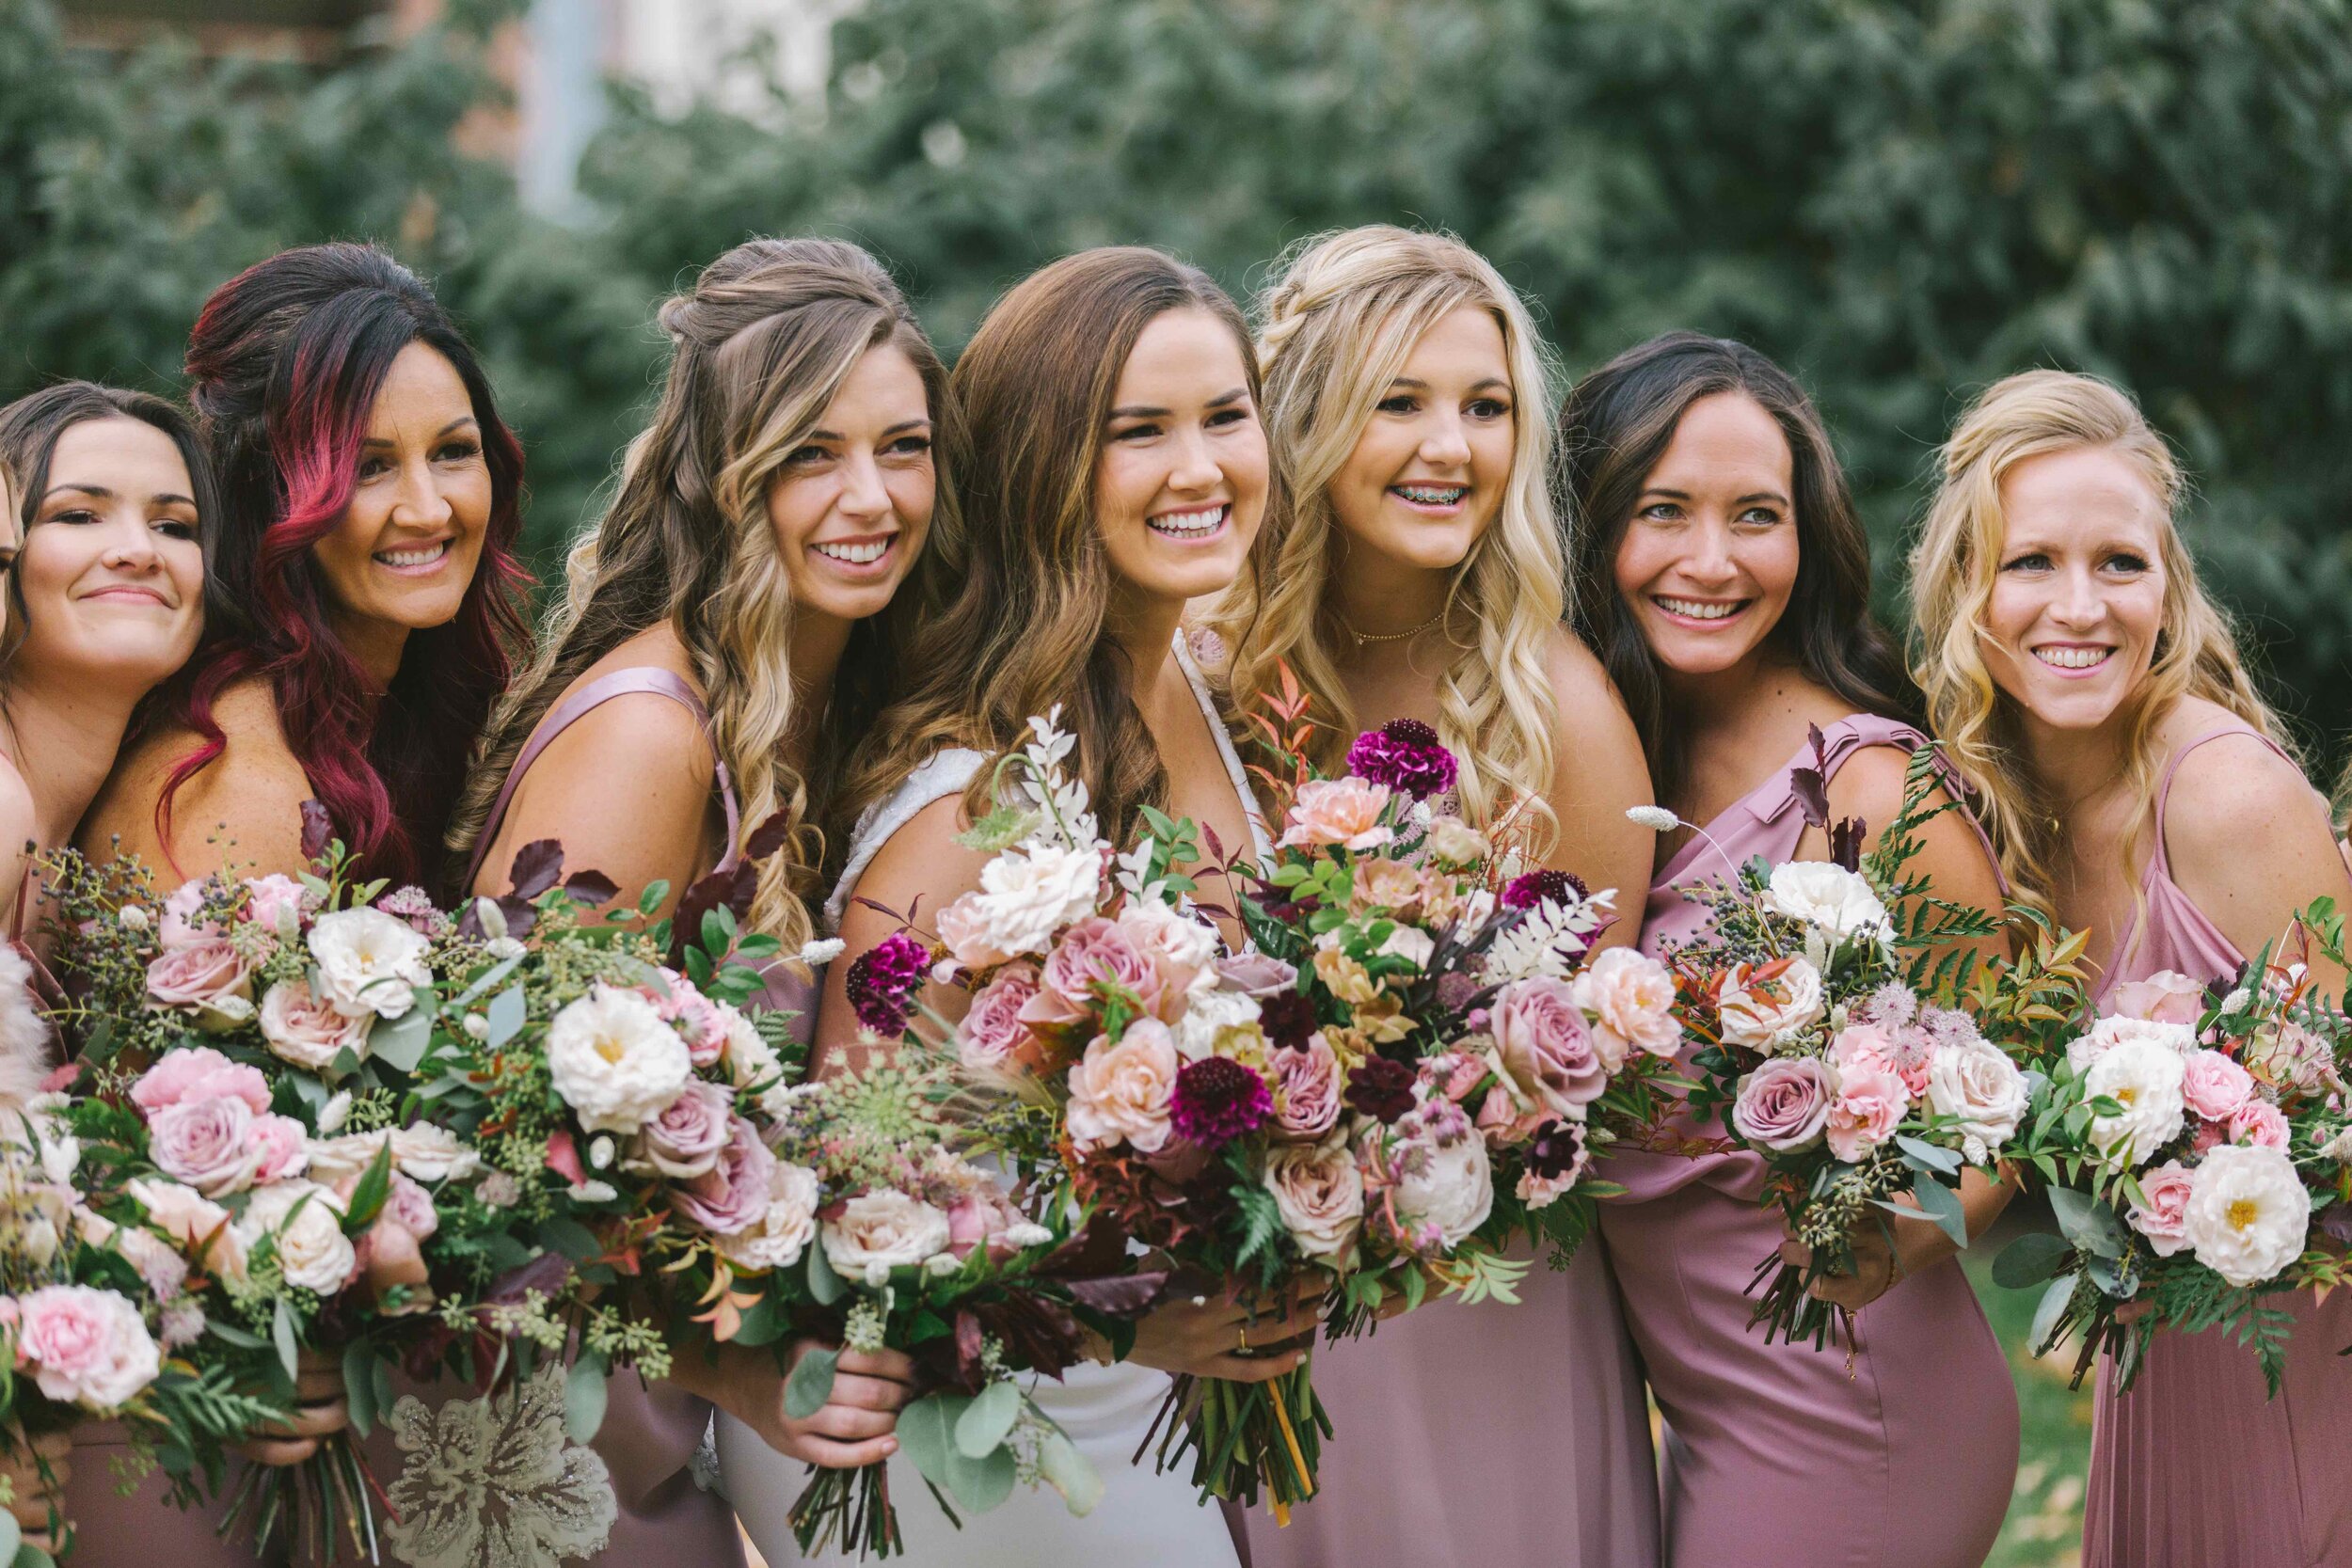 Whimsical bridal bouquet with mauve and blush garden roses and ranunculus, chocolate cosmos, chocolate lace flower, privet berries, white ferns, eggplant scabiosa, and natural greenery. Nashville wedding florist at the Cordelle.